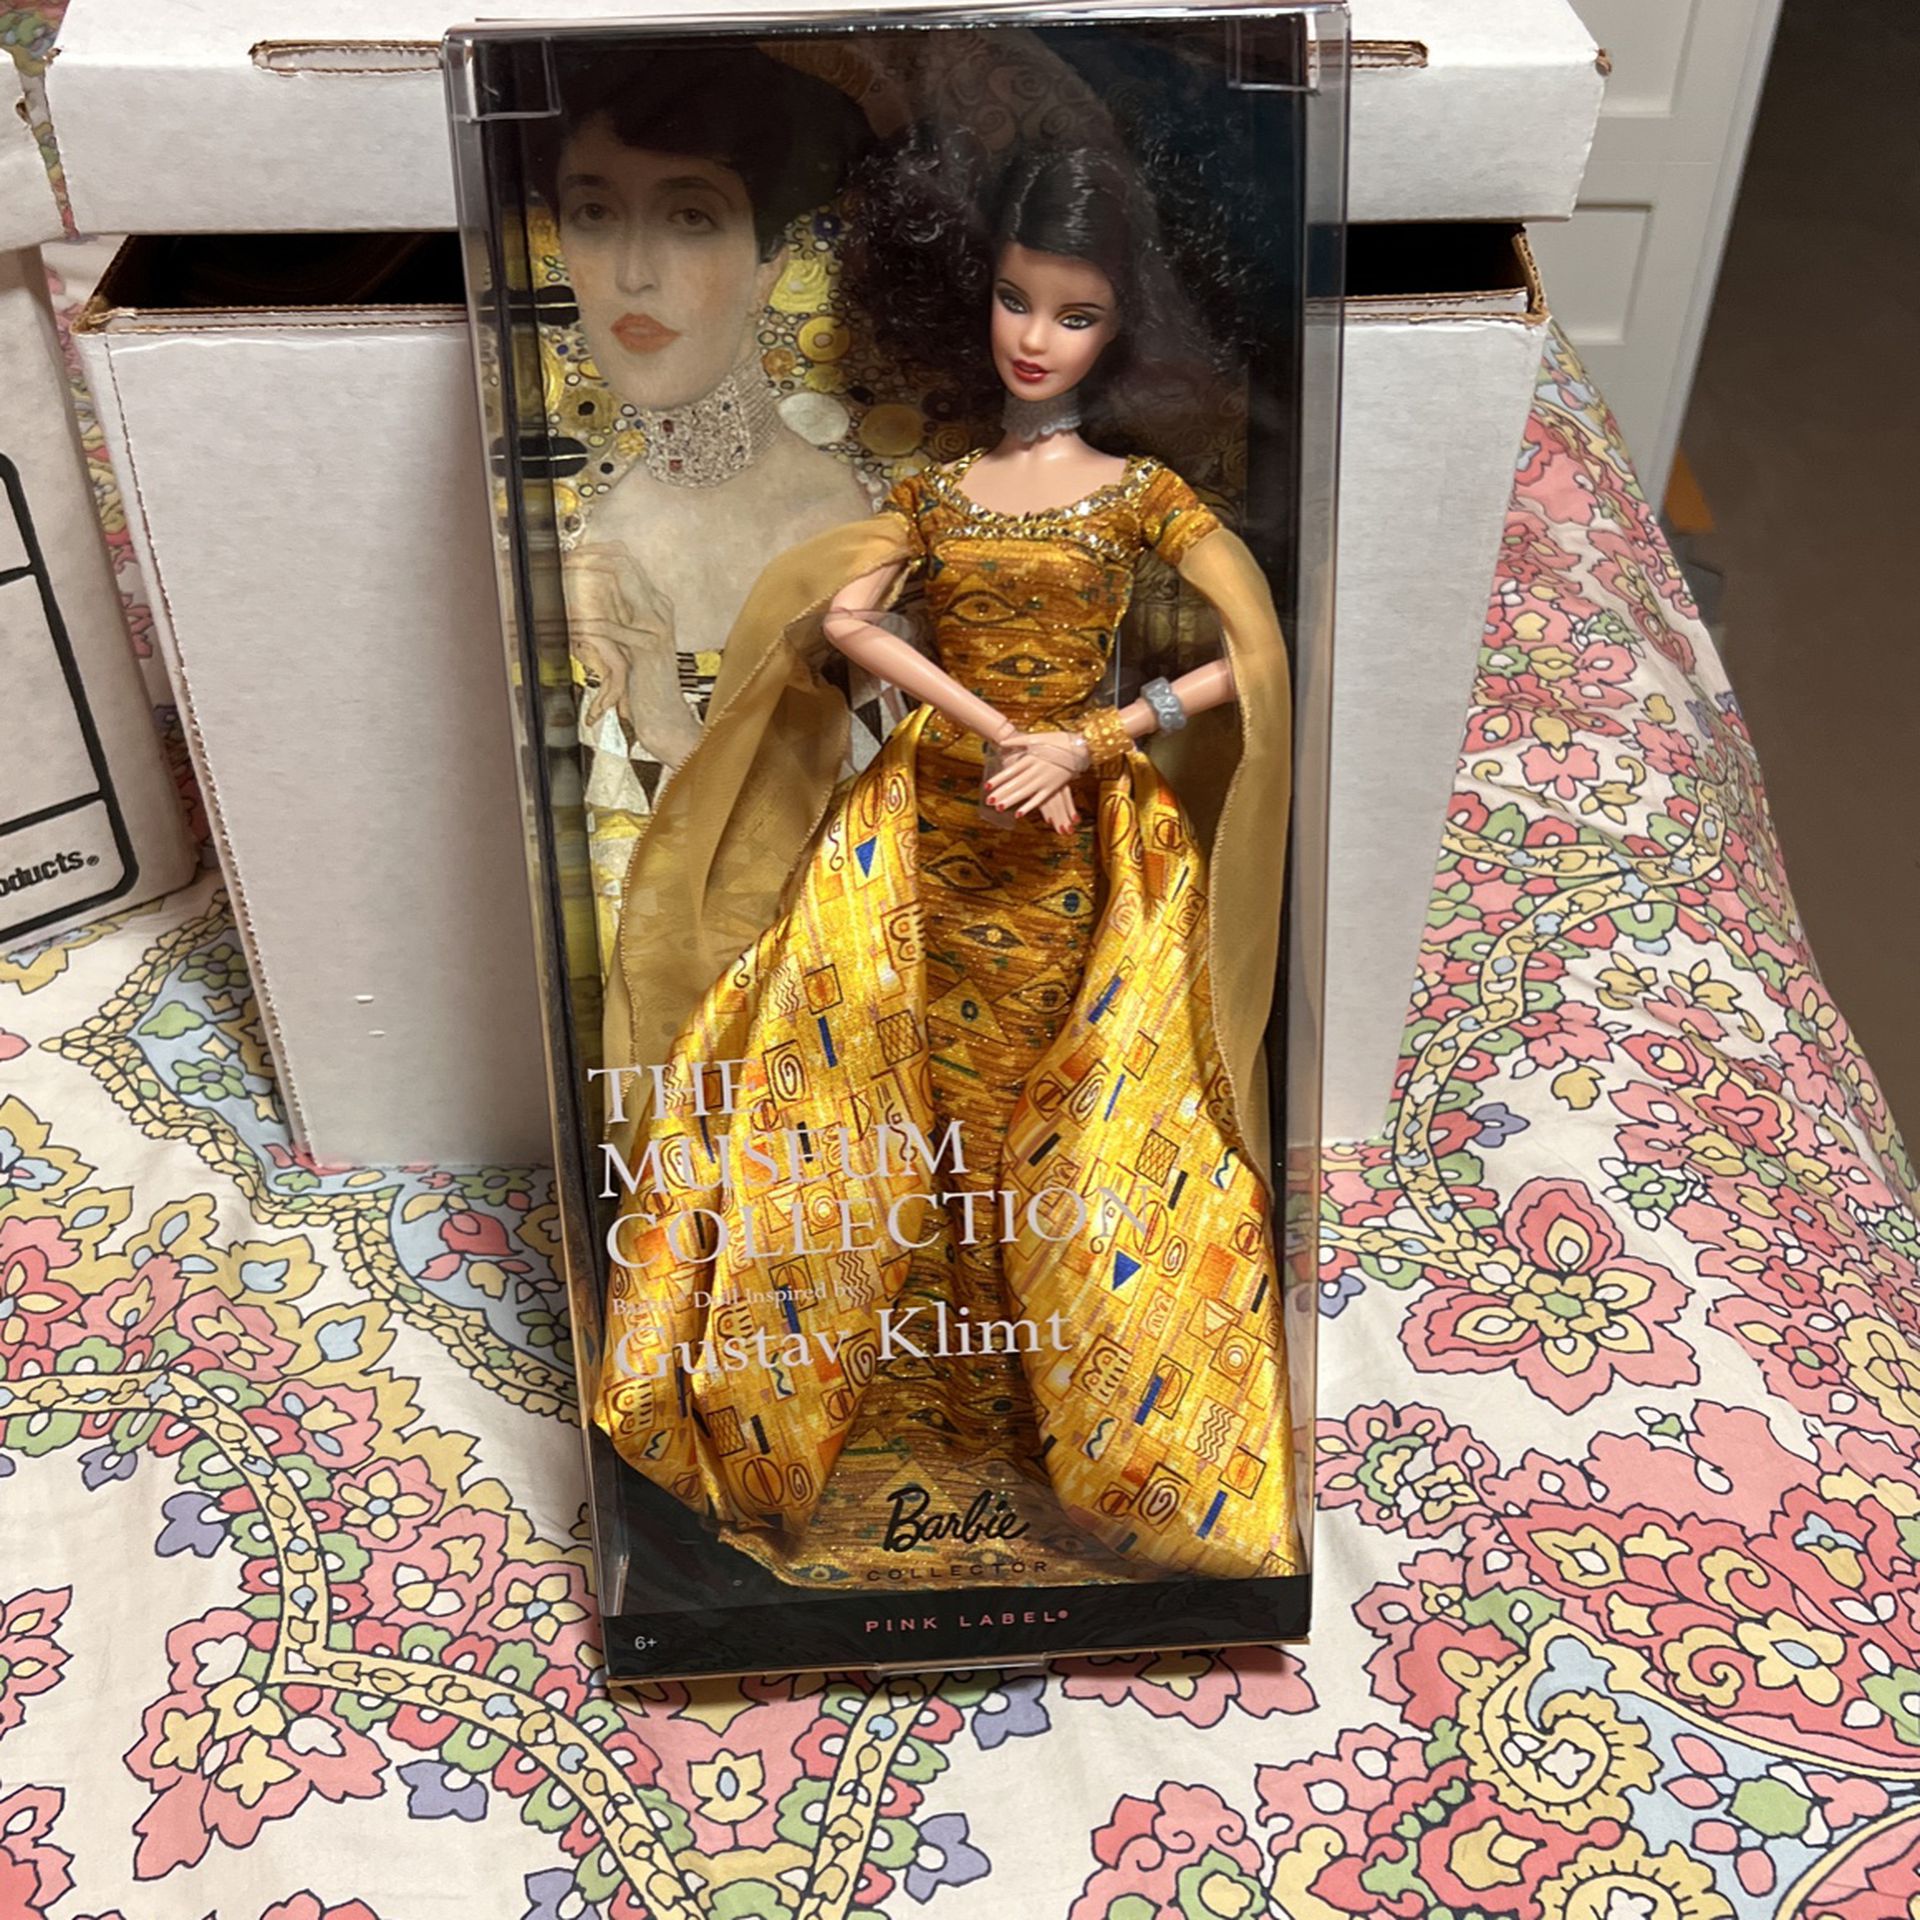 Bitterheid Voorrecht Kent Barbie Doll The Museum Collection Inspired by The Kiss by Gustav Klimt for  Sale in Seattle, WA - OfferUp